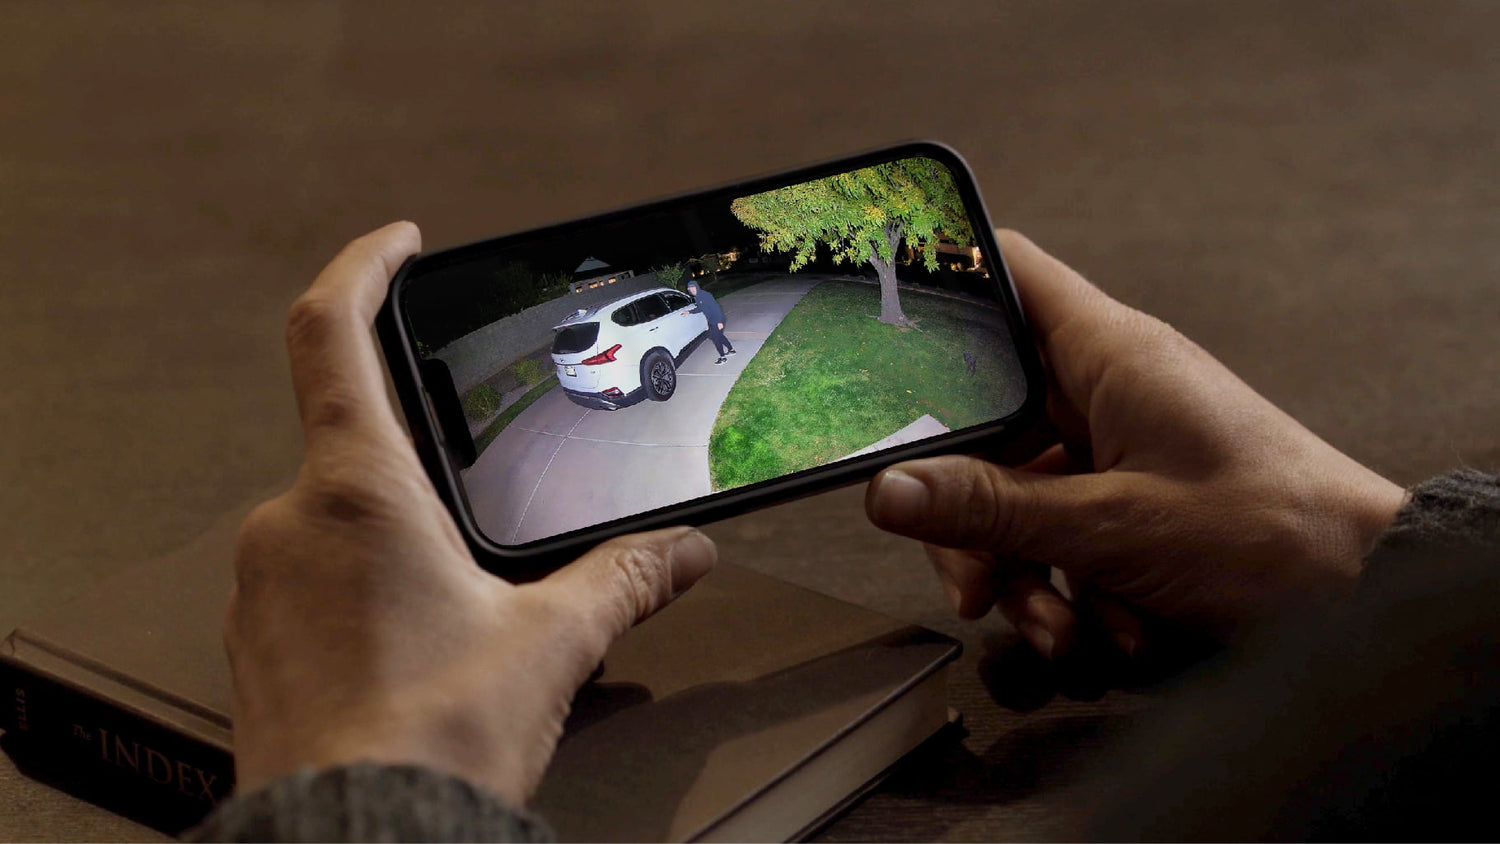 Hands holding phone with livestream of man approaching car parked in a driveway. Security camera light illuminates the scene.